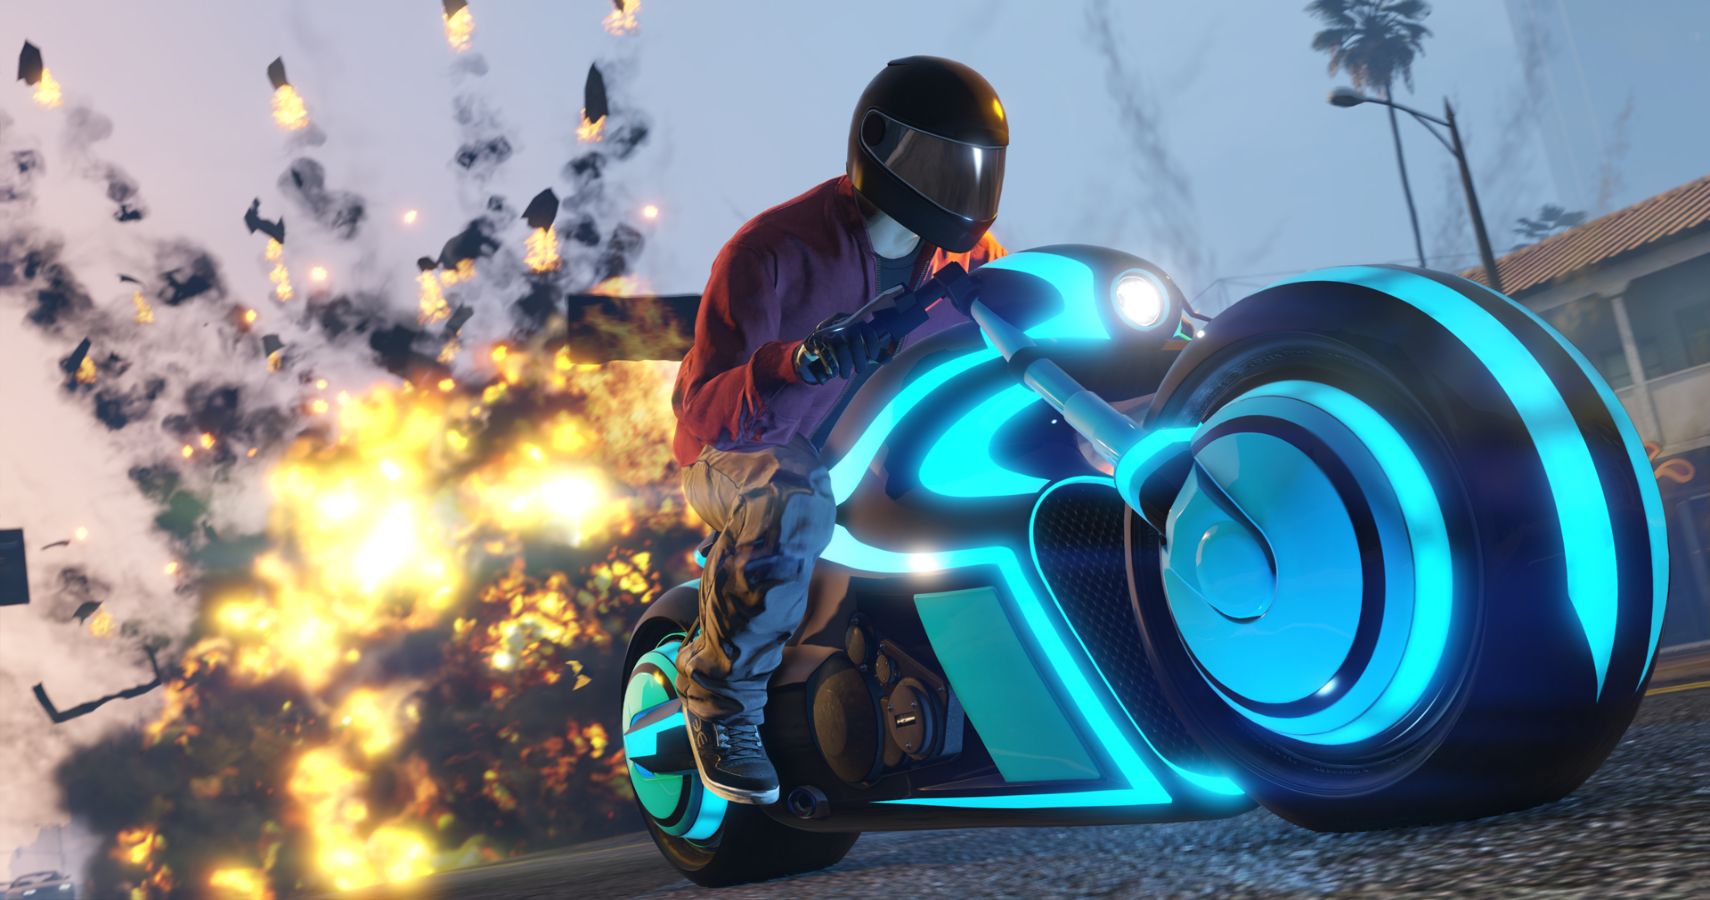 Get A Sweet Tron Bike At A Discount In This Weekend's GTA Online Events